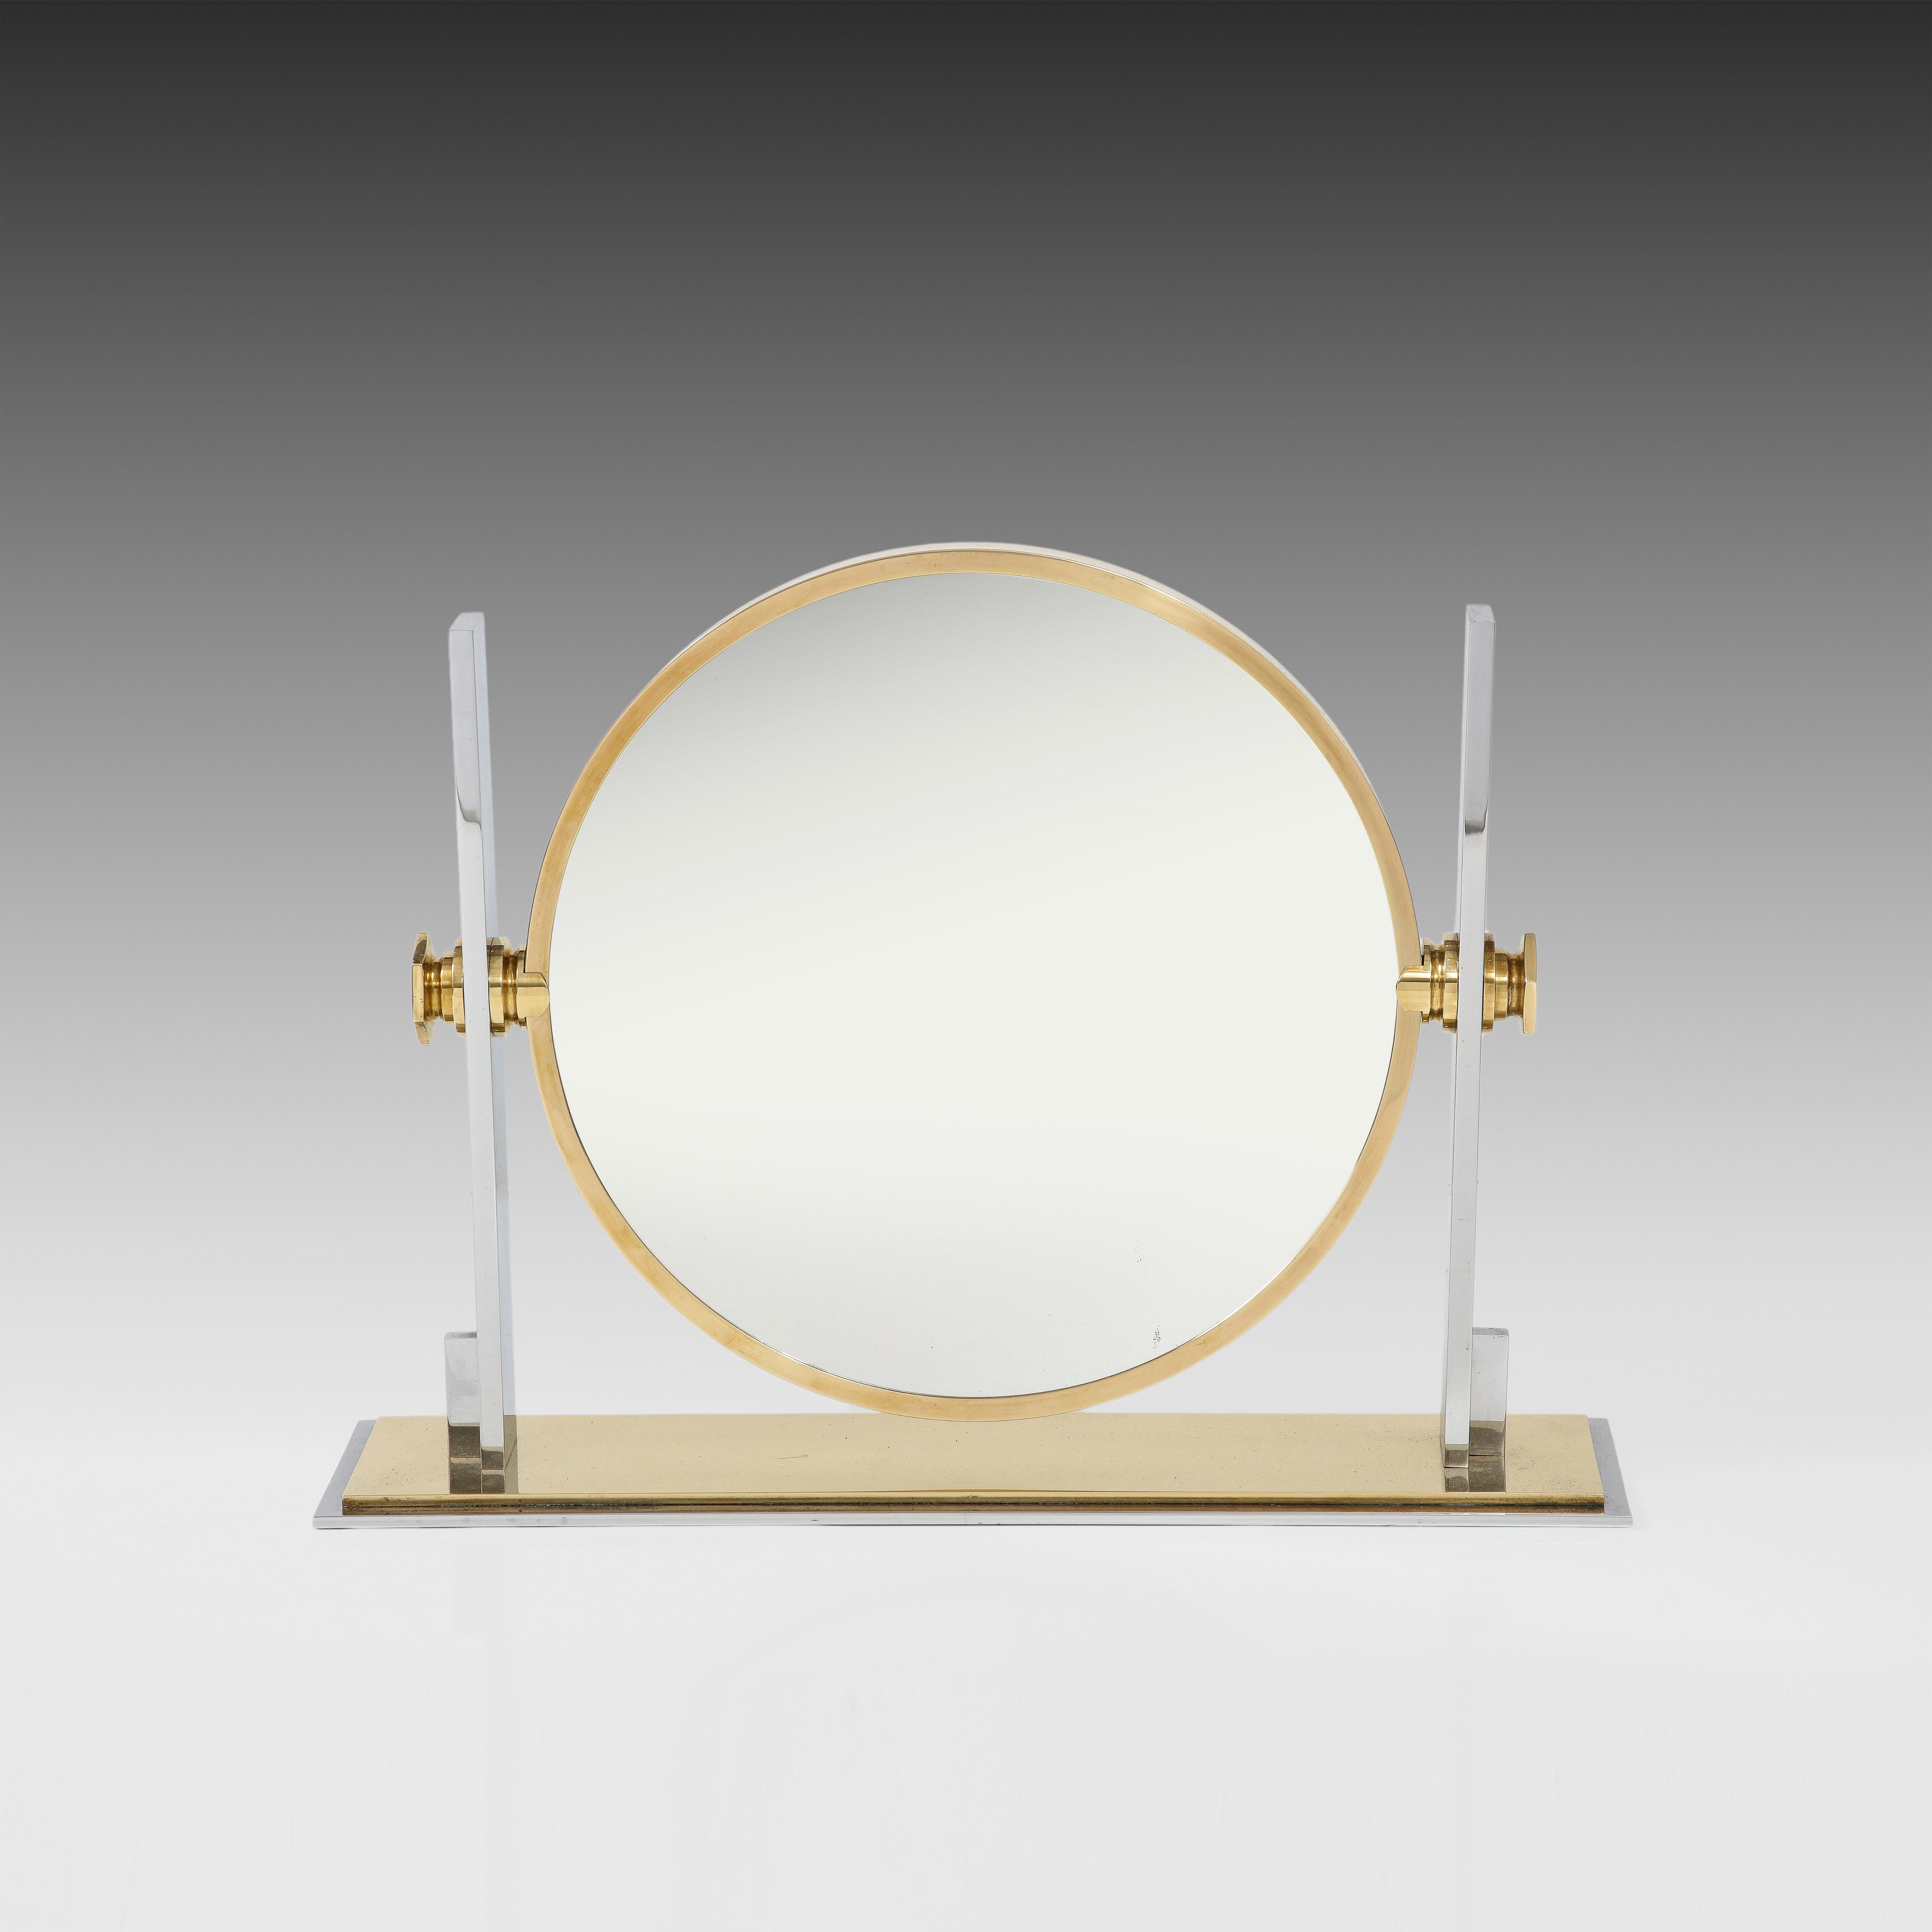 Polished Karl Springer Large Vanity Mirror in Brass and Chrome, USA, 1980s For Sale